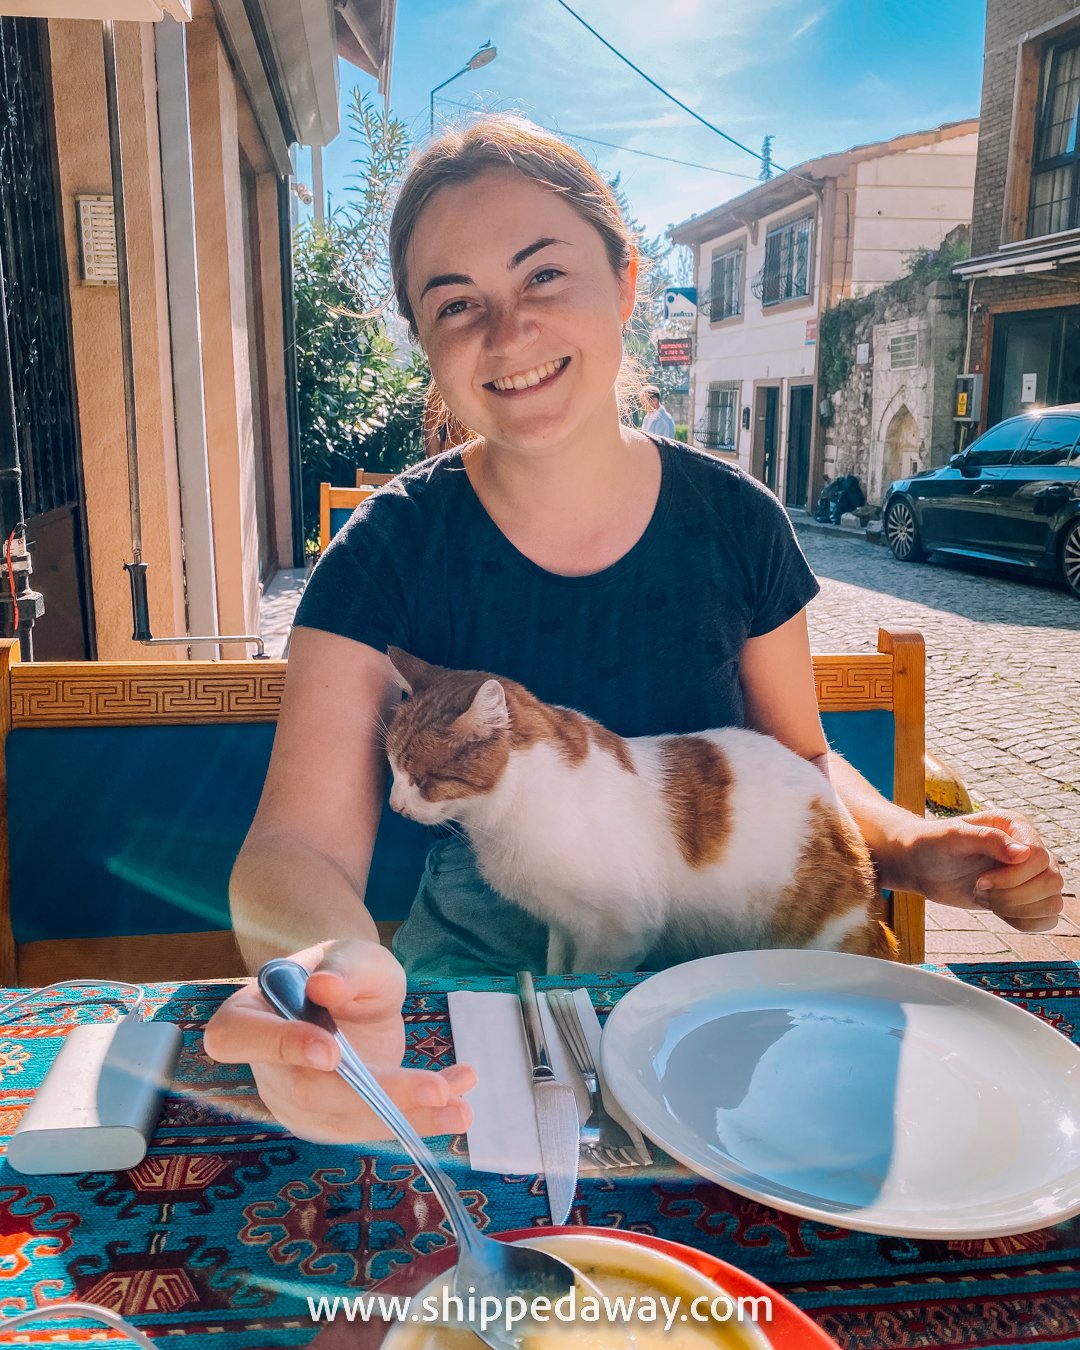 Arijana Tkalcec at a restaurant with a cat in her lap, Istanbul